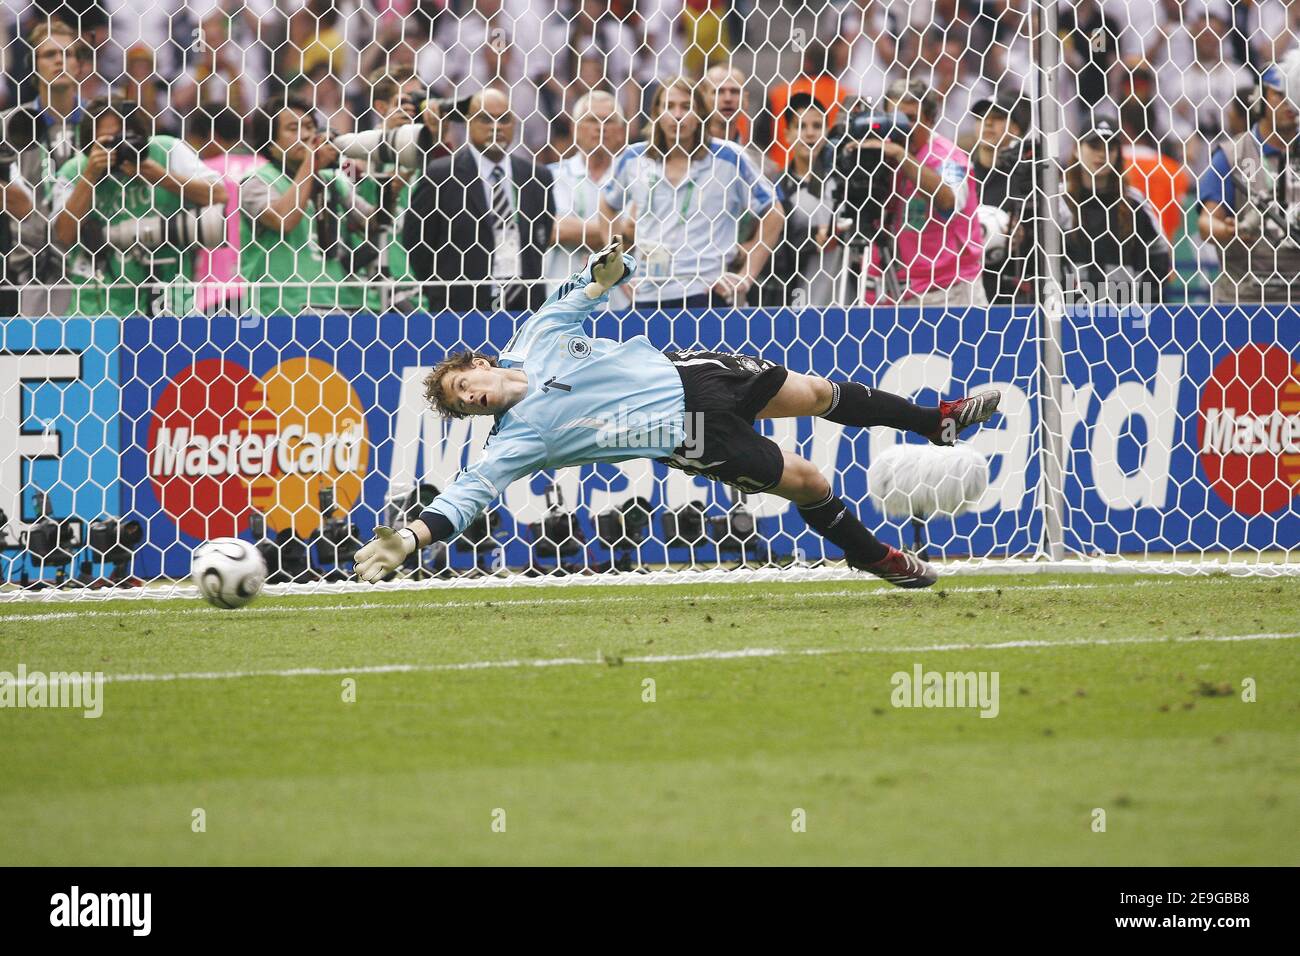 Germany's goalkeeper Jens Lehmann during the FIFA World Cup 2006, quarter final, Germany vs Argentina, in Berlin, Germany, on June 30, 2006. The game ended in draw 1-1 and Germany won (4-2) in a penalty-kick shootout. Photo by Christian Liewig/ABACAPRESS.COM Stock Photo